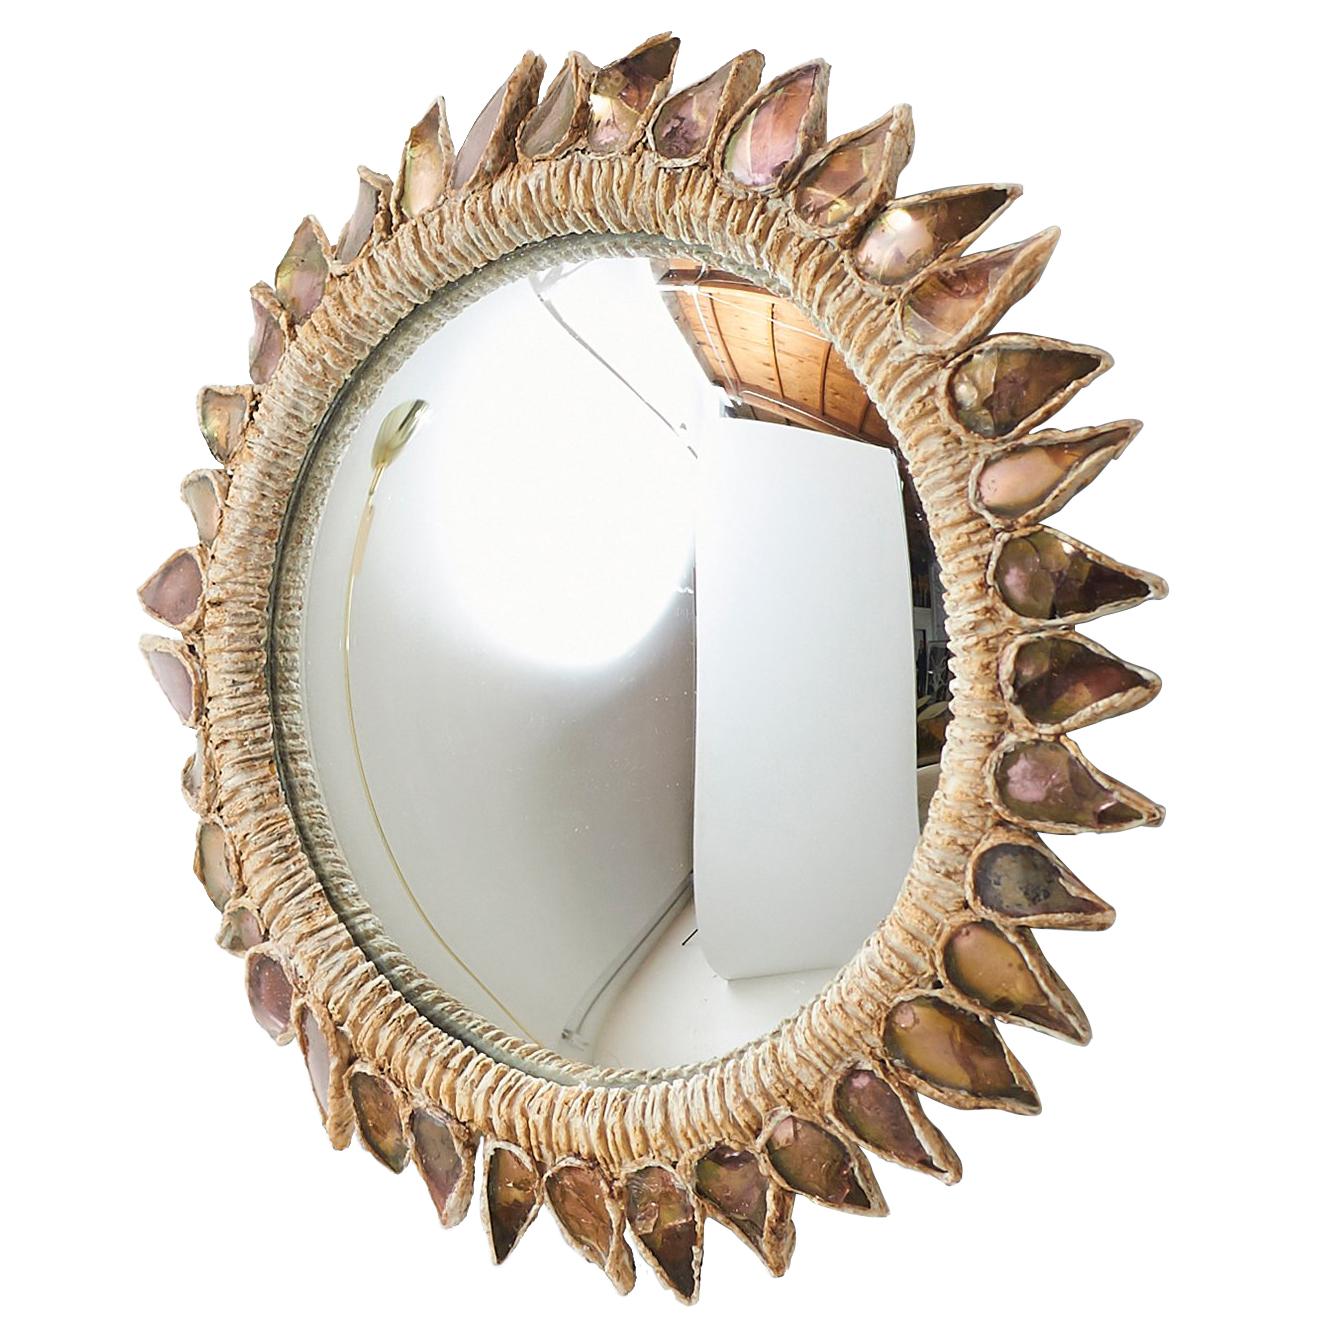 "Pink Thistle" Mirror by Line Vautrin